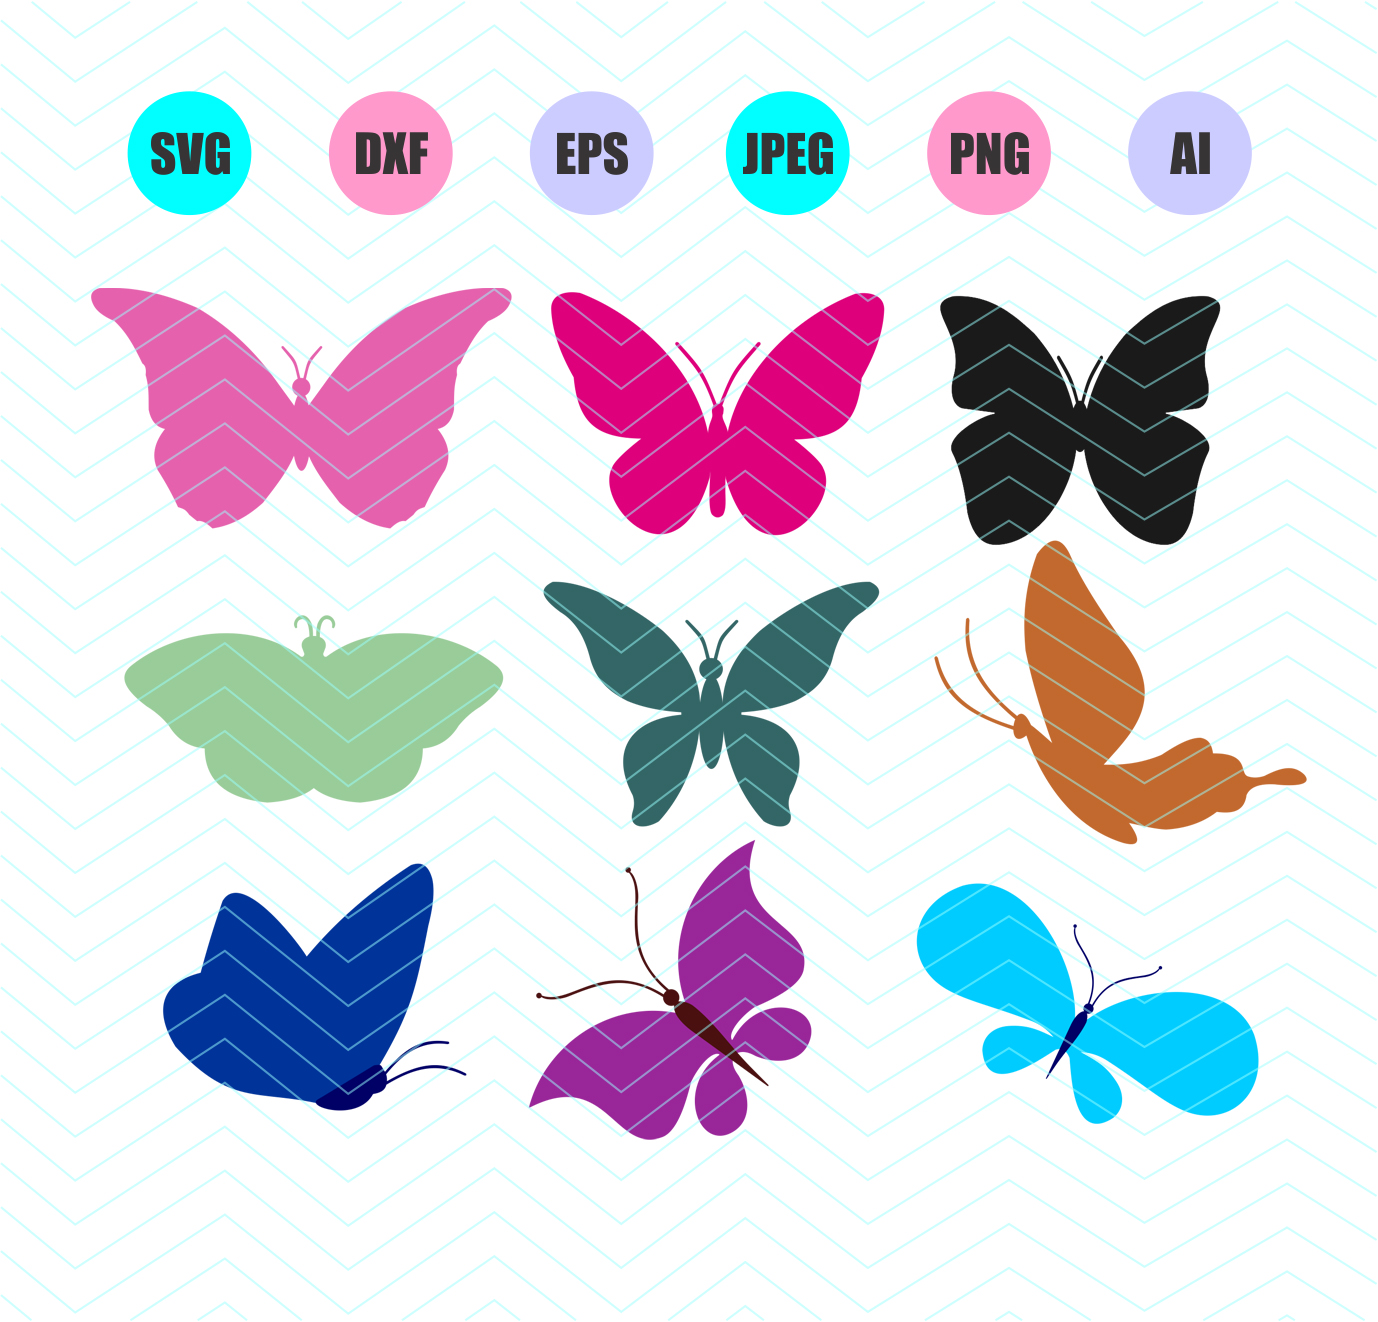 Download Butterflies Svg Dxf Eps Png Jpg Ai Cut Vector File ...